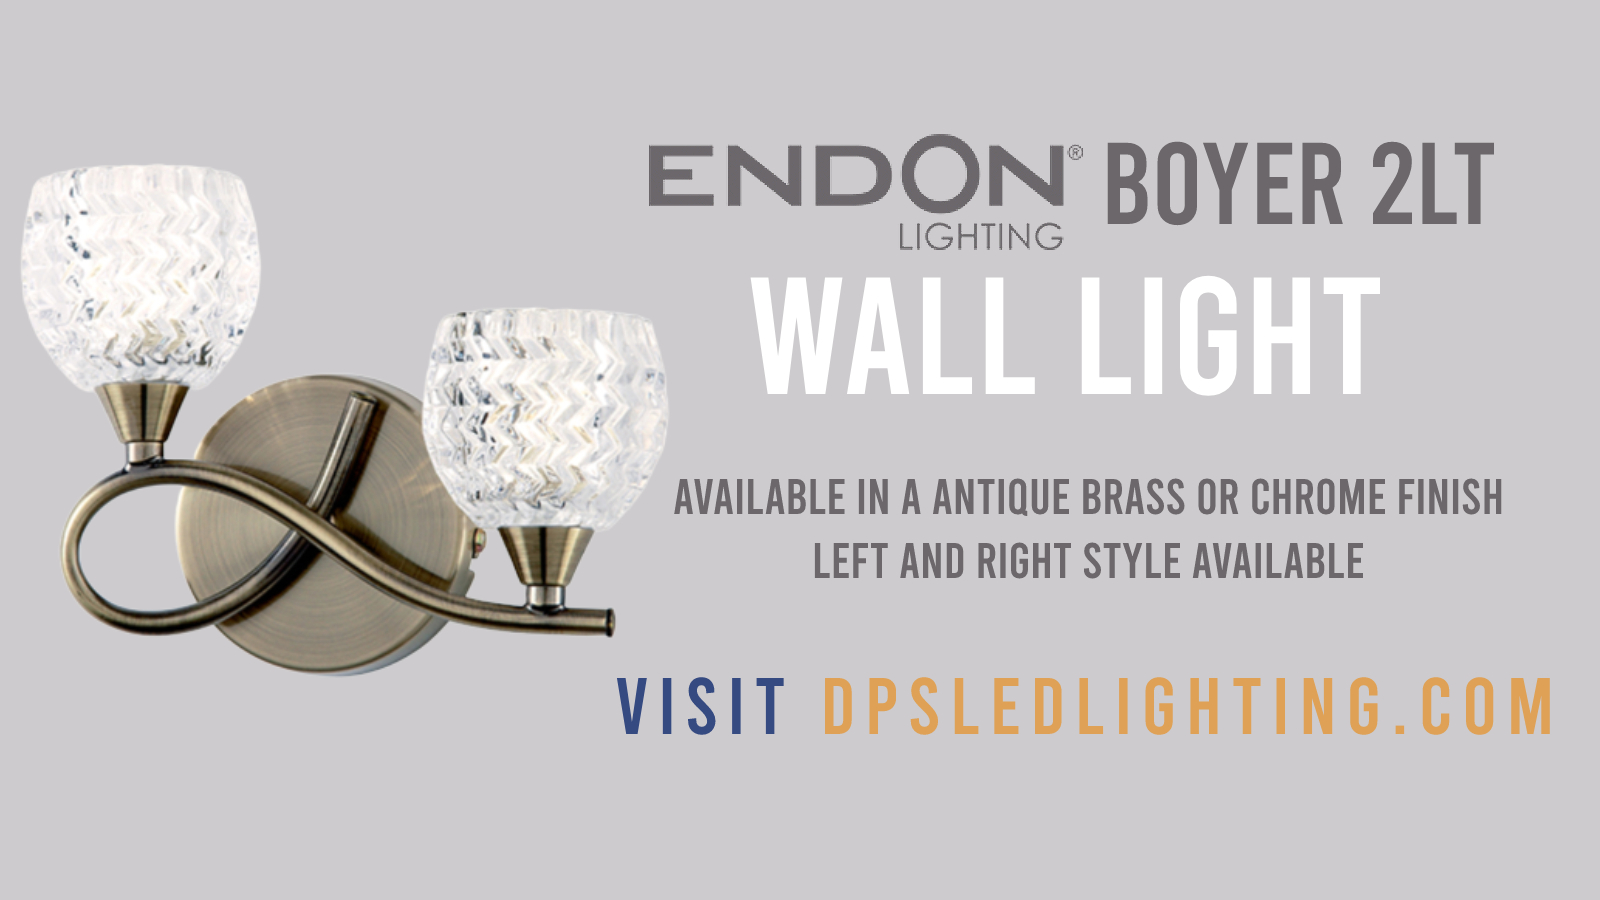 Complete with 2 x 3W G9 LED Bulbs Modern Adjustable Twin LED Picture Wall Light Antique Brass 